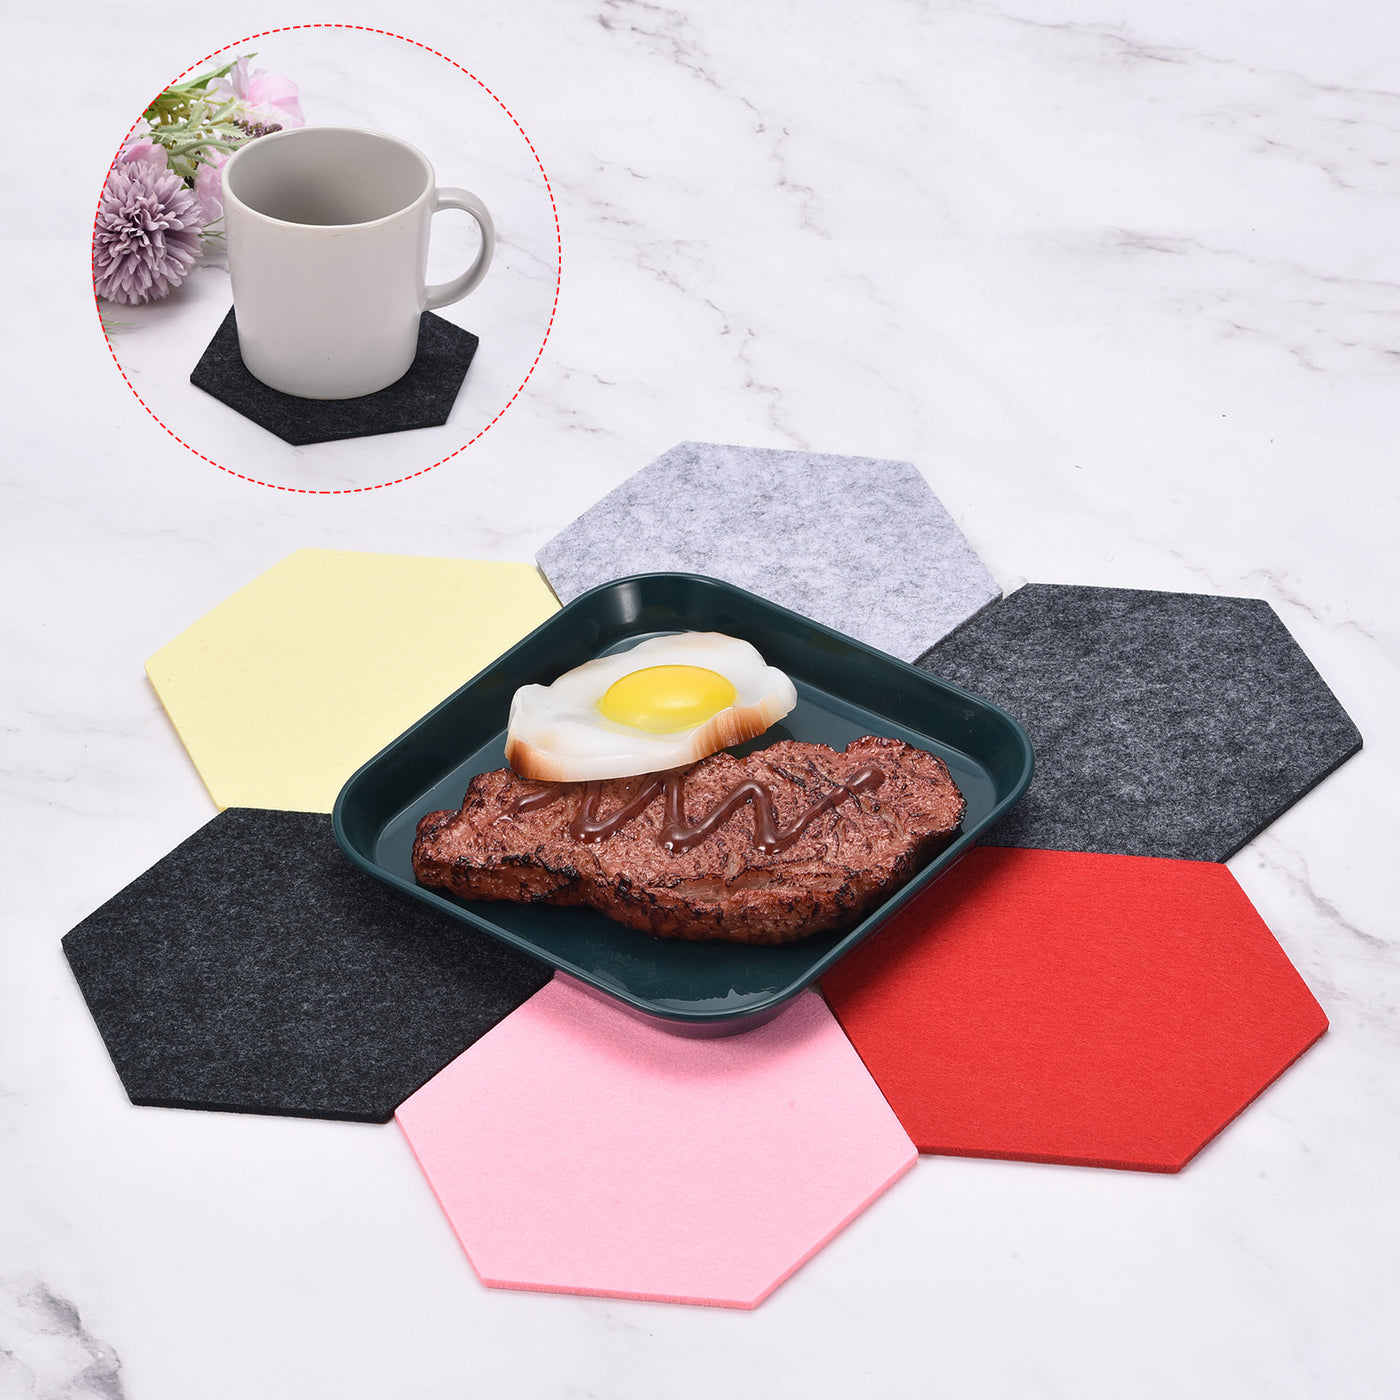 uxcell Uxcell Felt Coasters 9pcs Absorbent Pad Coaster for Drink Cup Pot Bowl Vase Purple